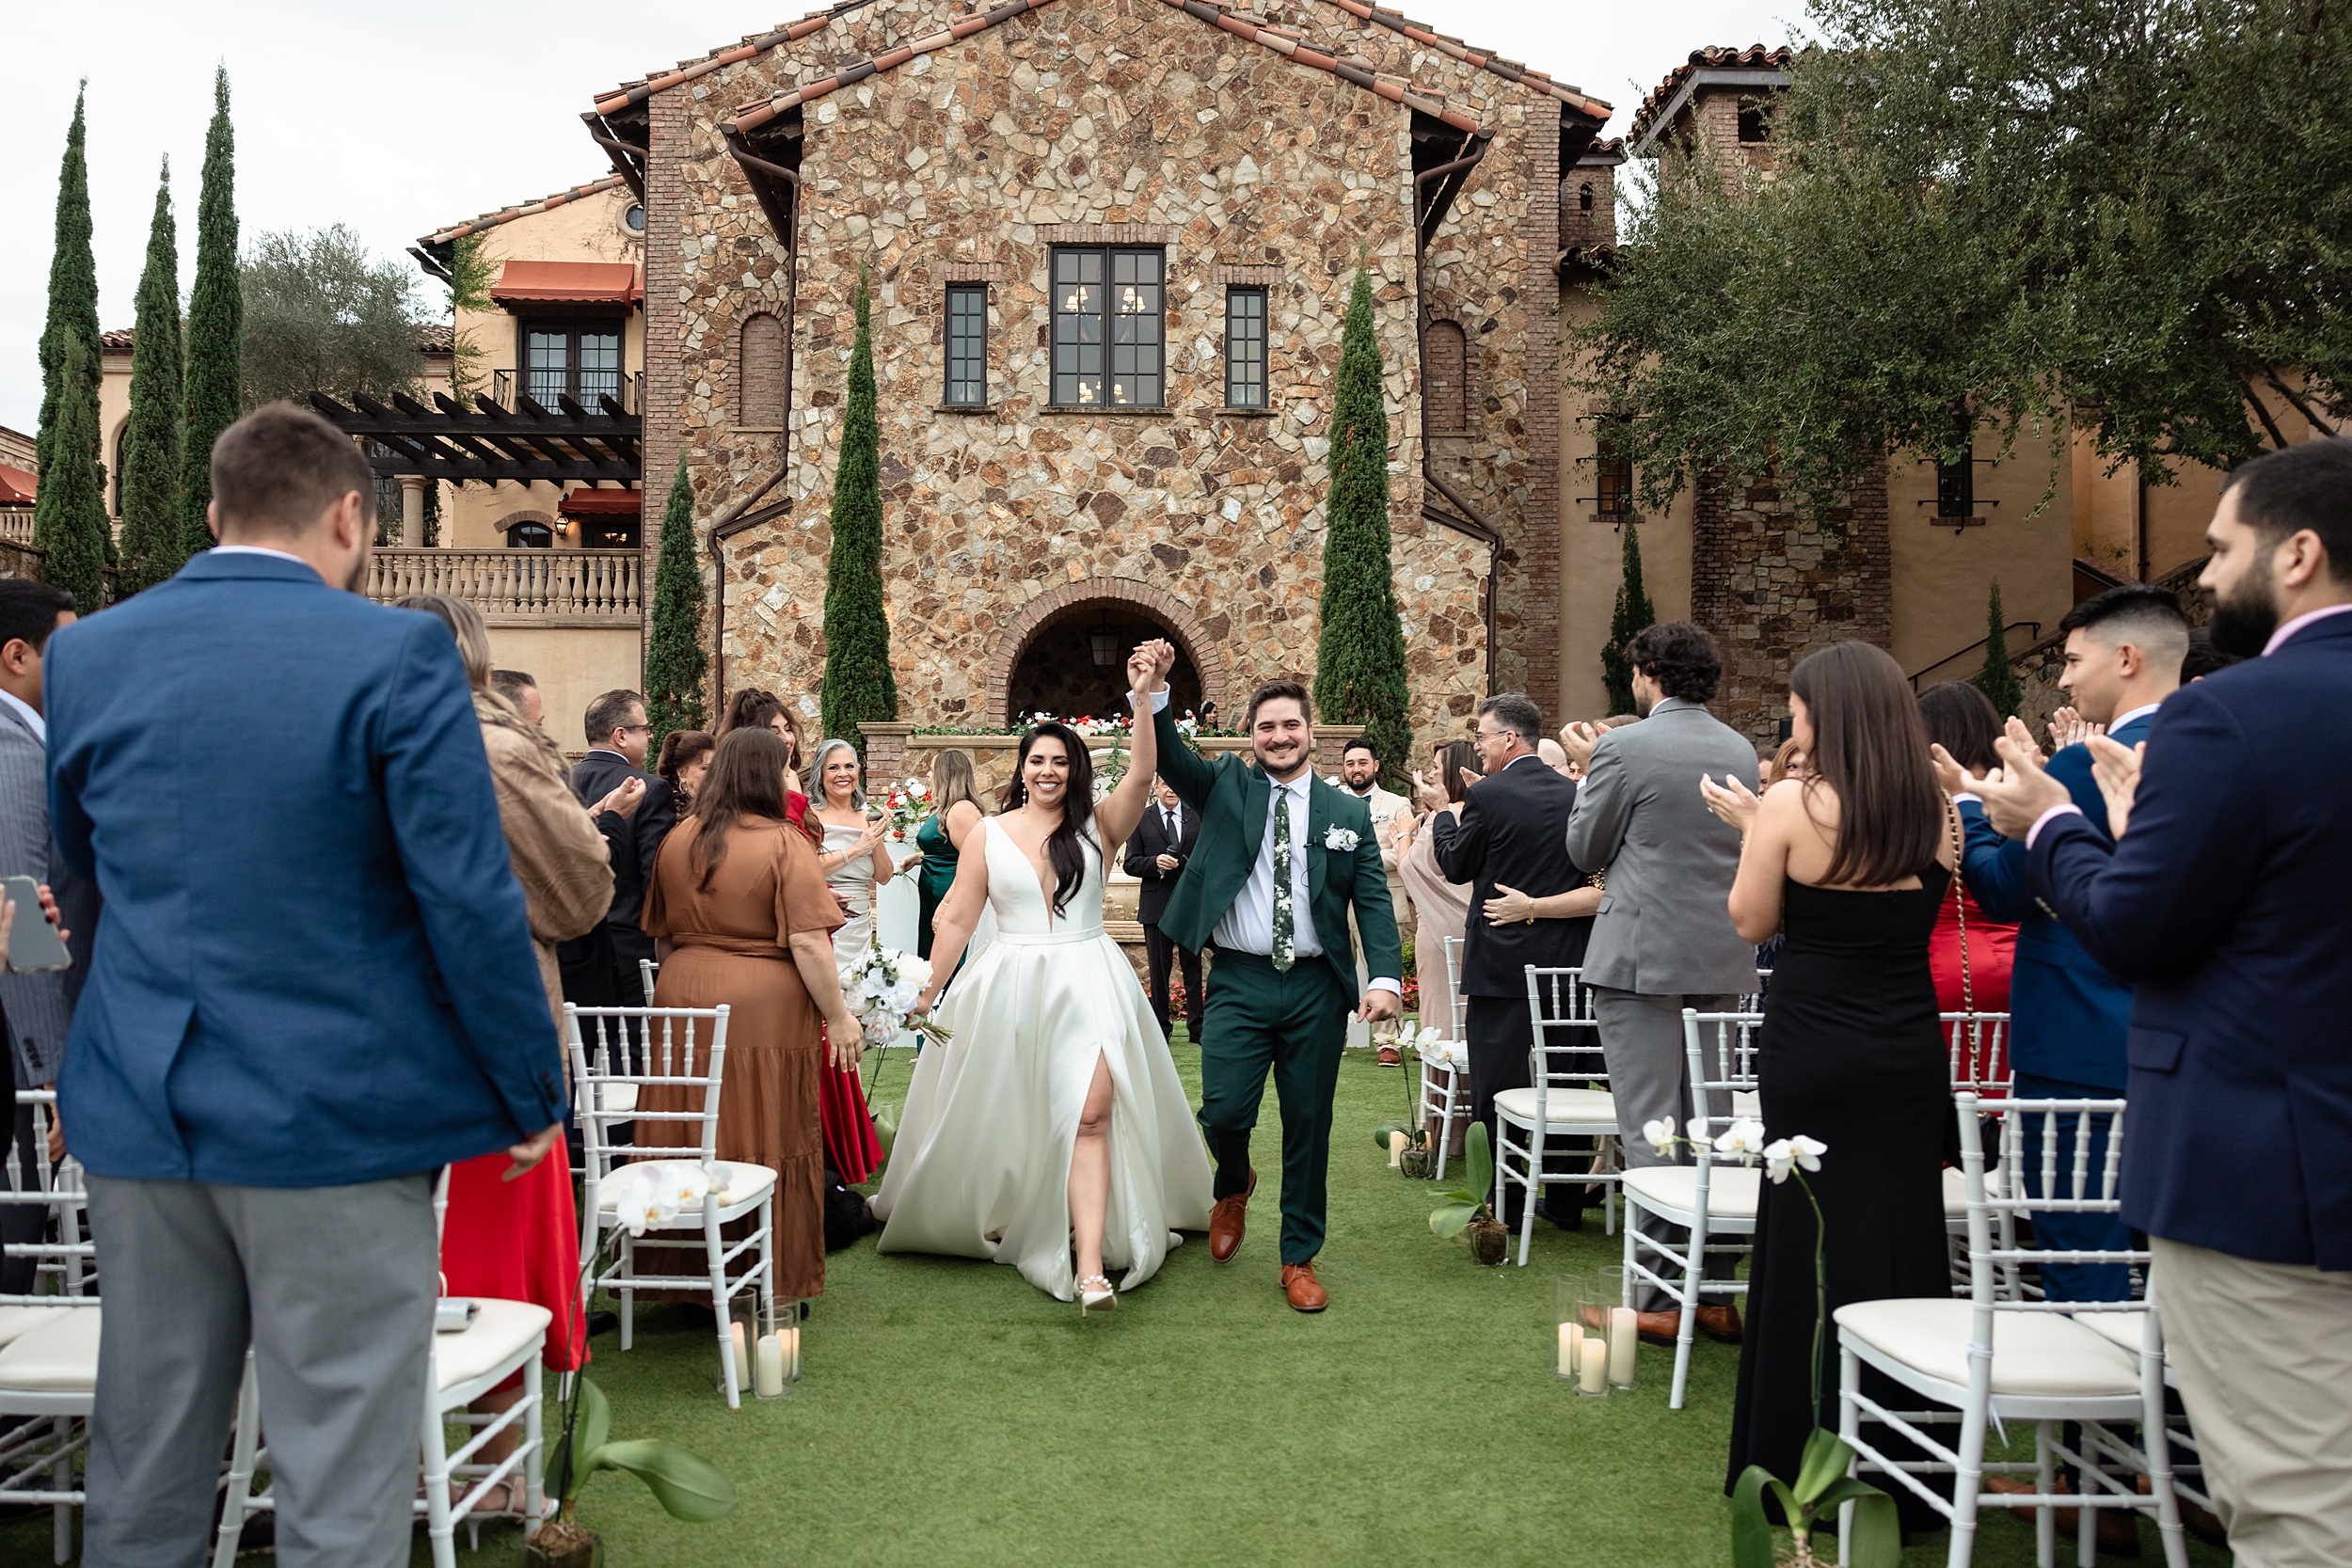 Newlyweds celebrate with hands up while walking up the aisle to applause from their guests